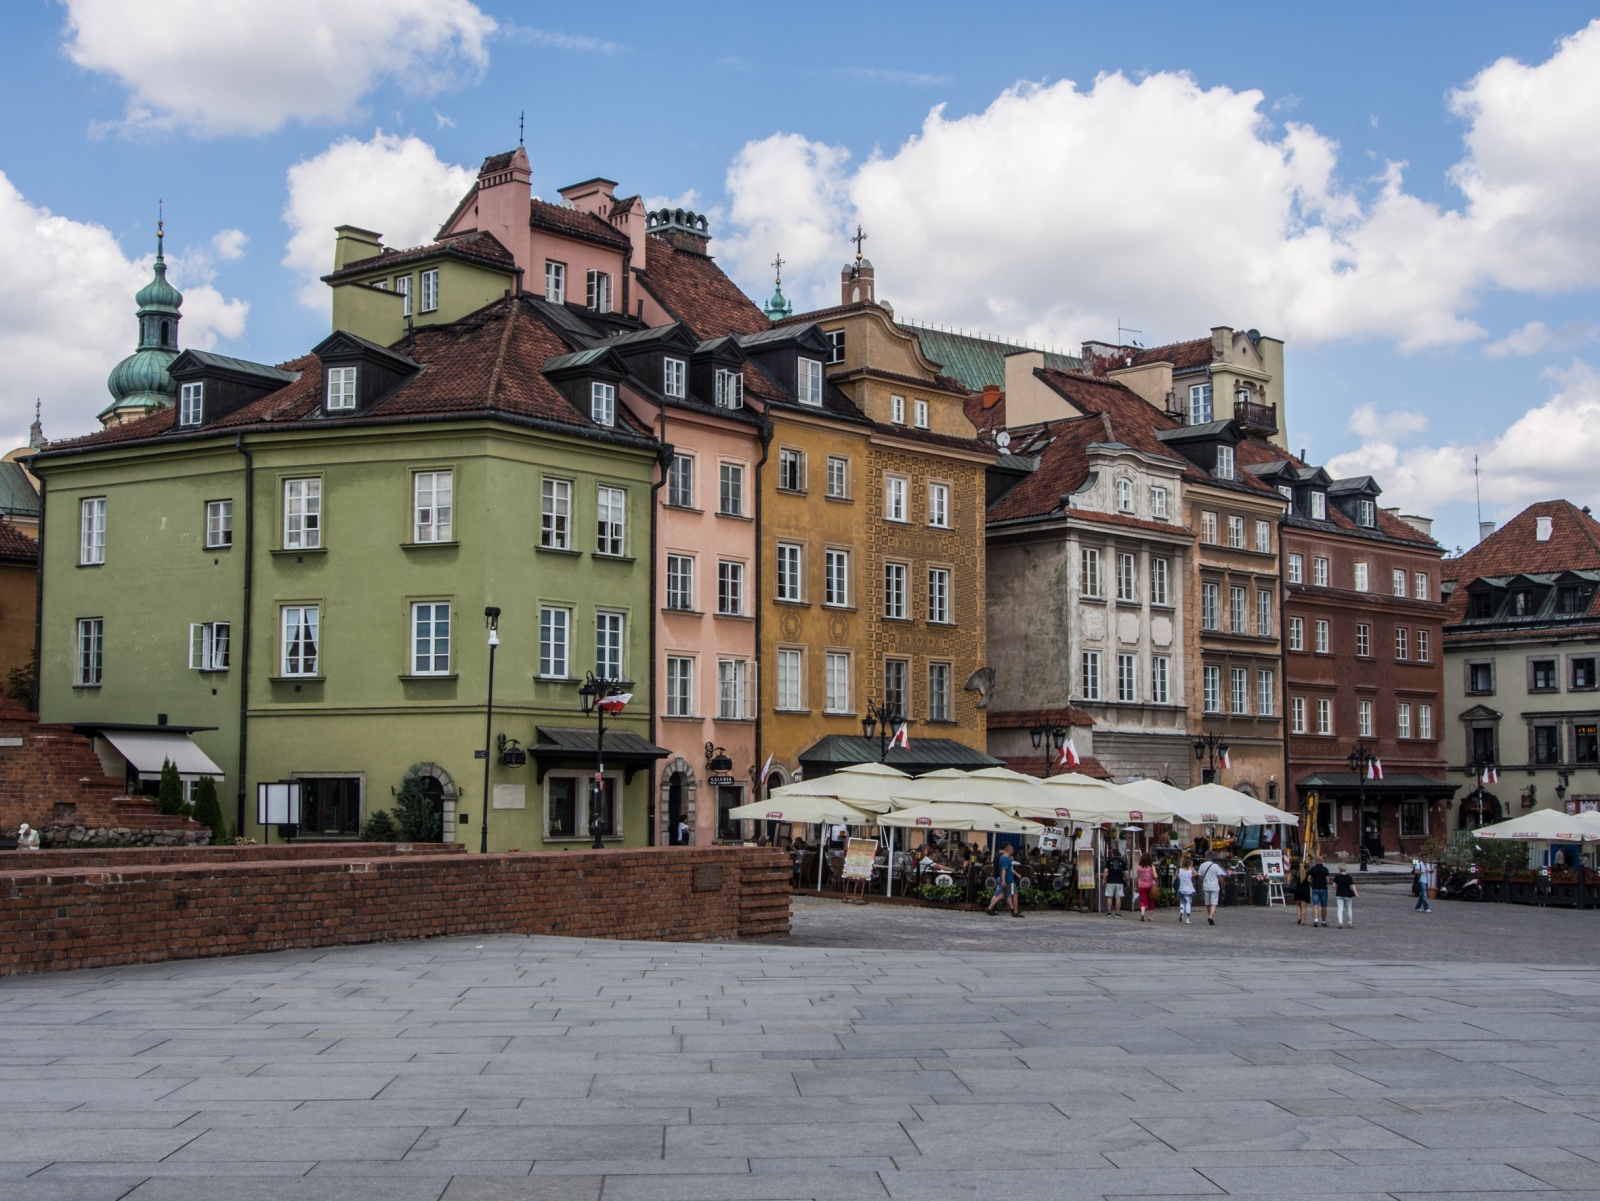 WARSAW - AUGUST 2015